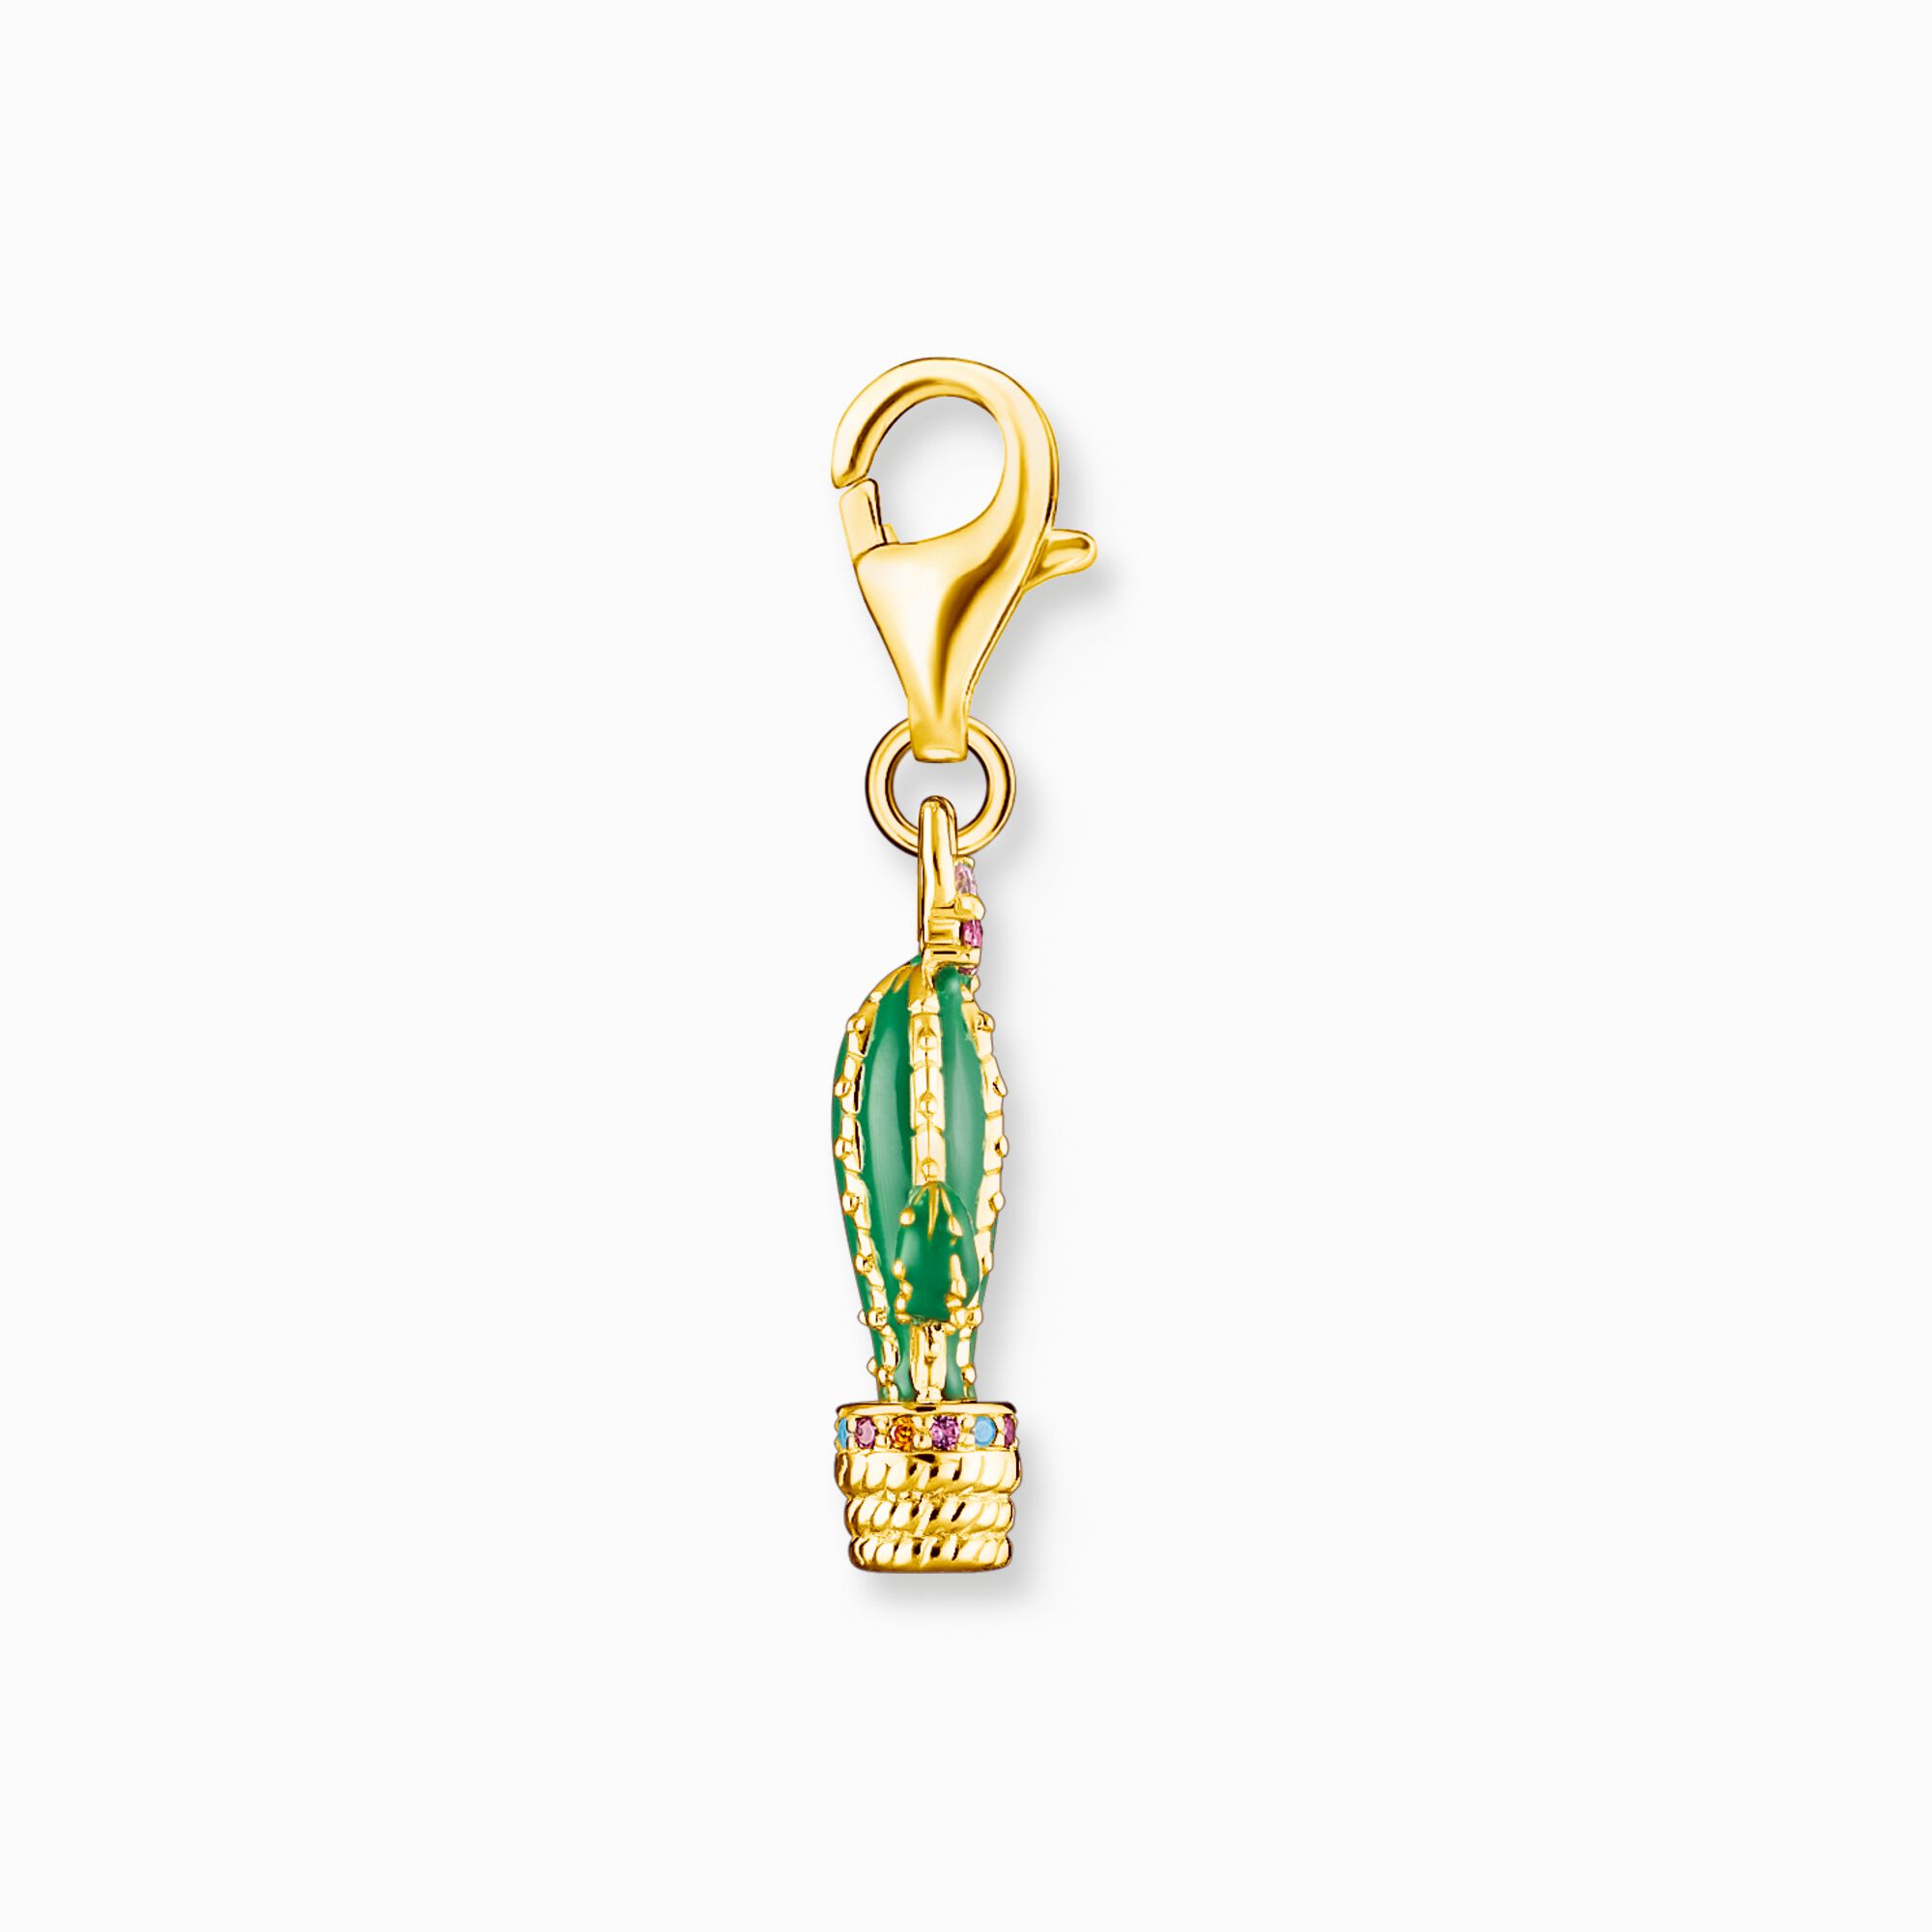 Charm, gold plated: Cactus with green cold enamel